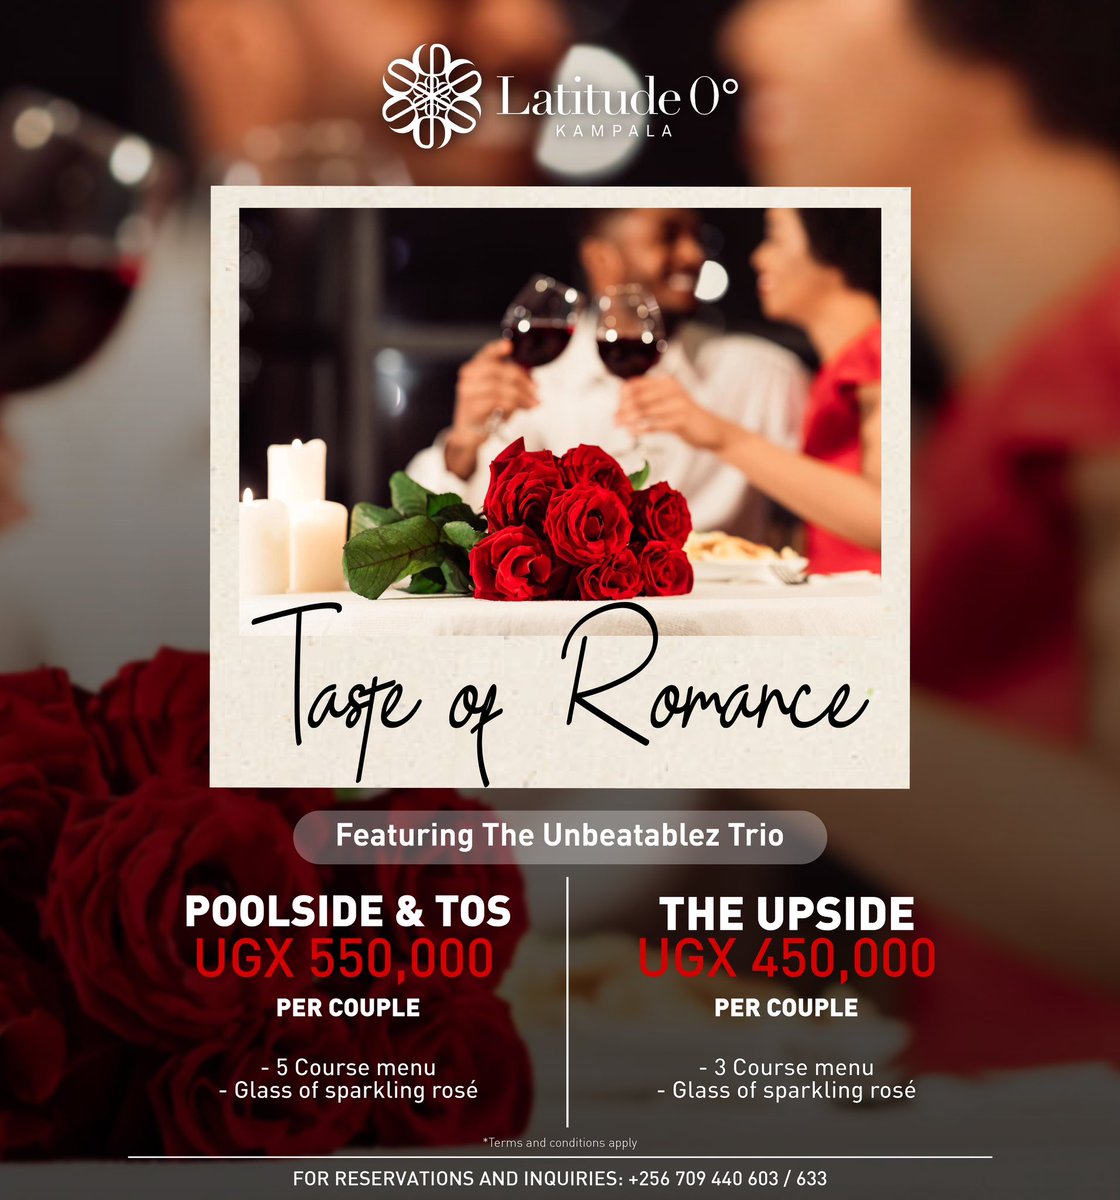 Love is best served with a “Taste of Romance.” 🌹 

Dine with us on Valentine’s Day as we celebrate love and groove the night away with Live Jazz music from The Unbeatablez Trio. 🎶 

#TasteofRomance #ValentinesDay #ValentinesDinner #JazzMusic